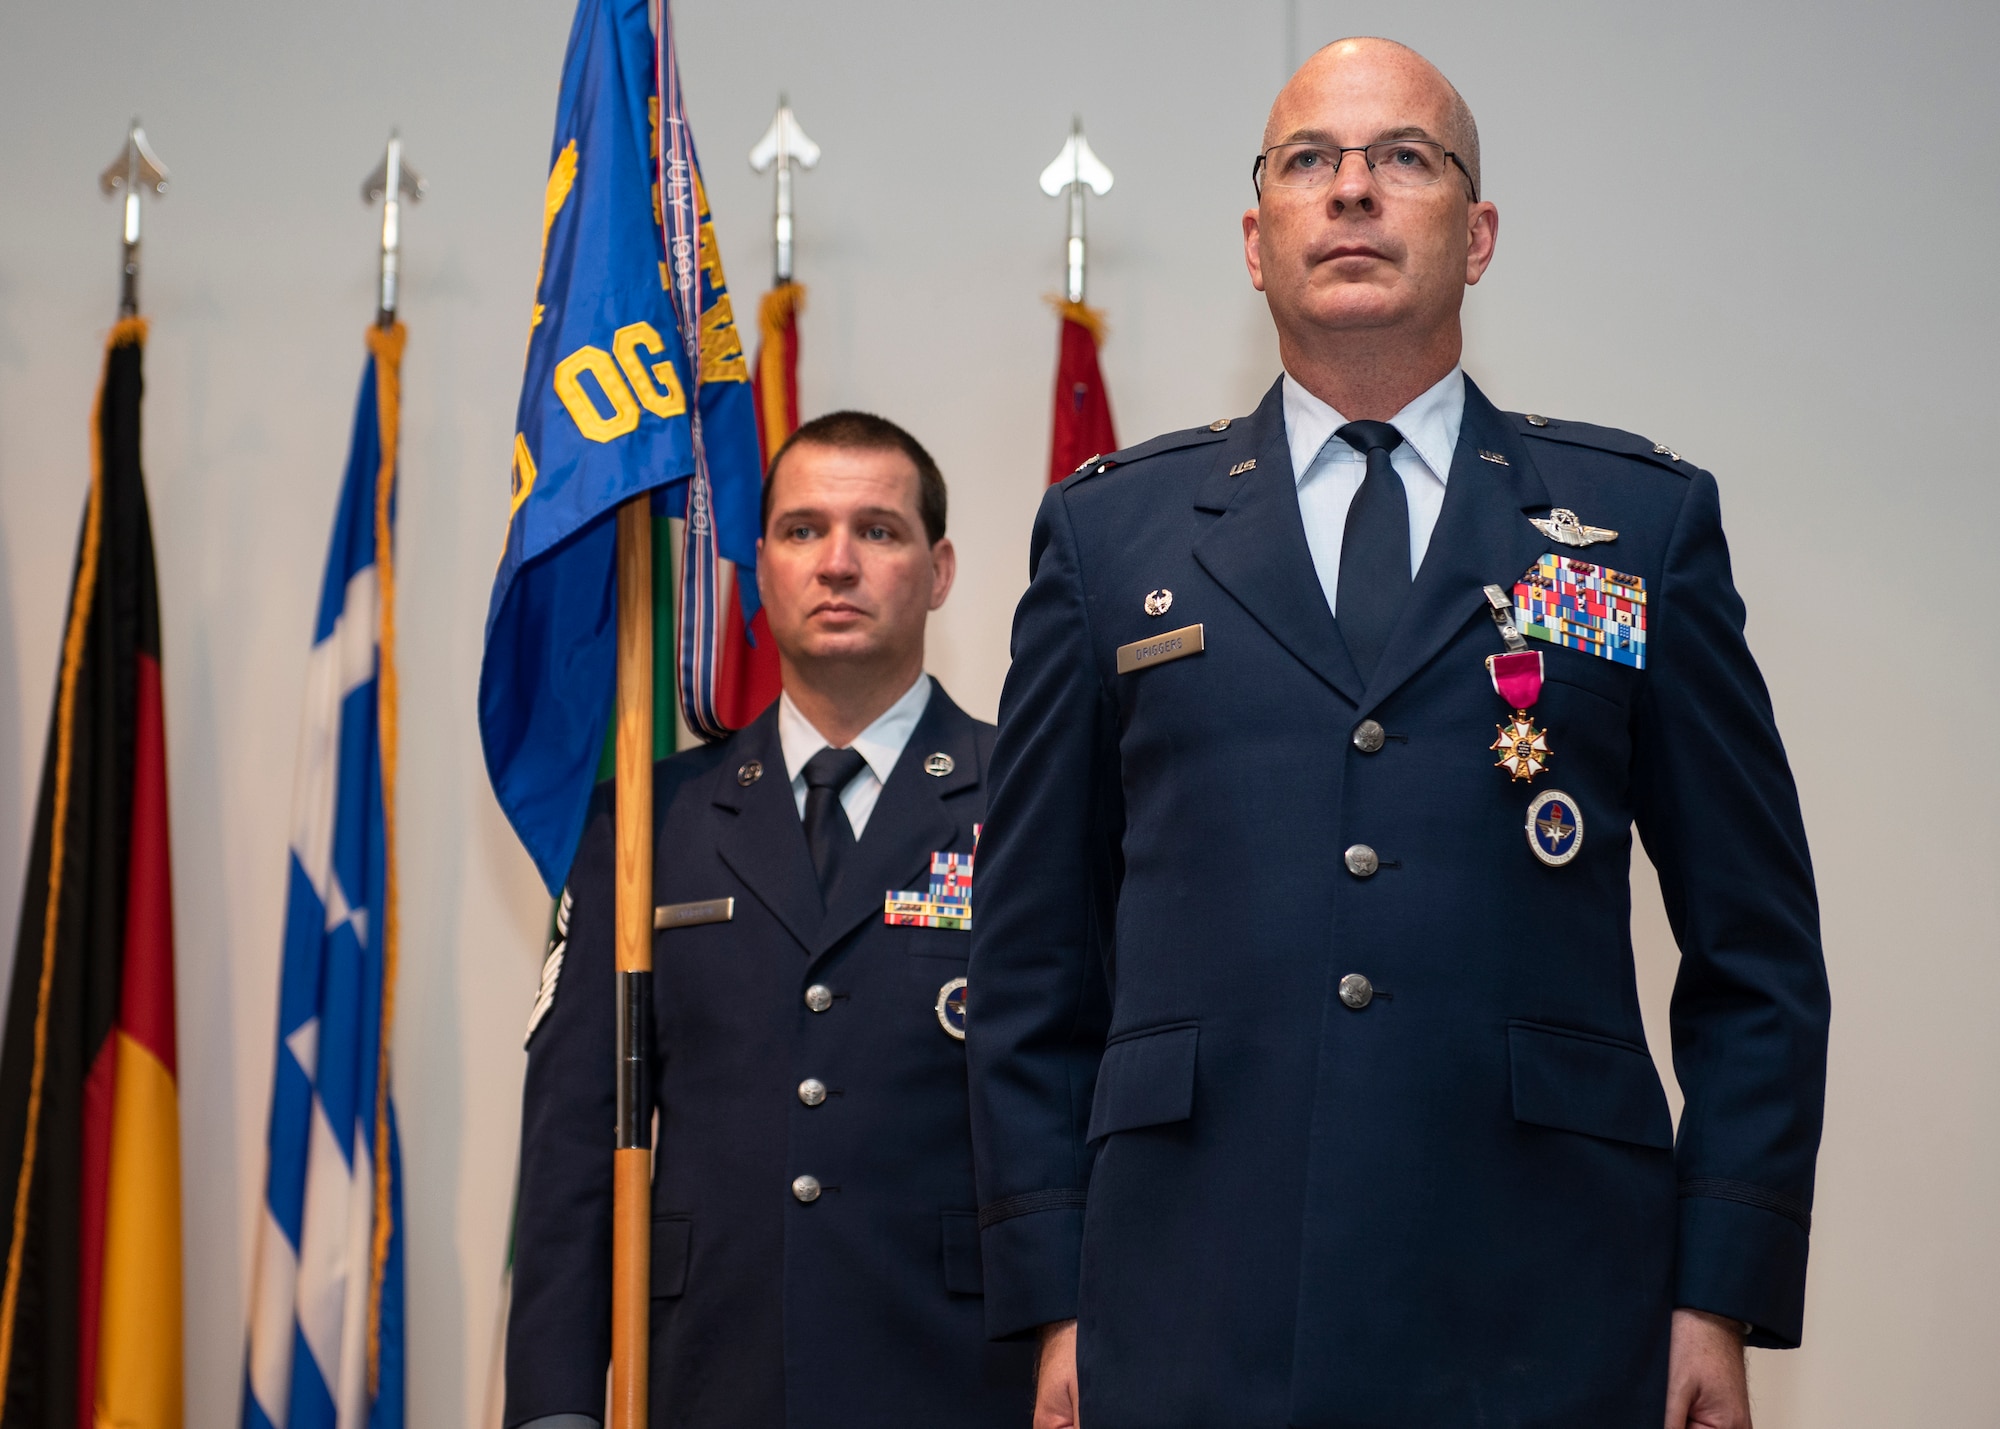 Driggers recognized after Legion of Merit award